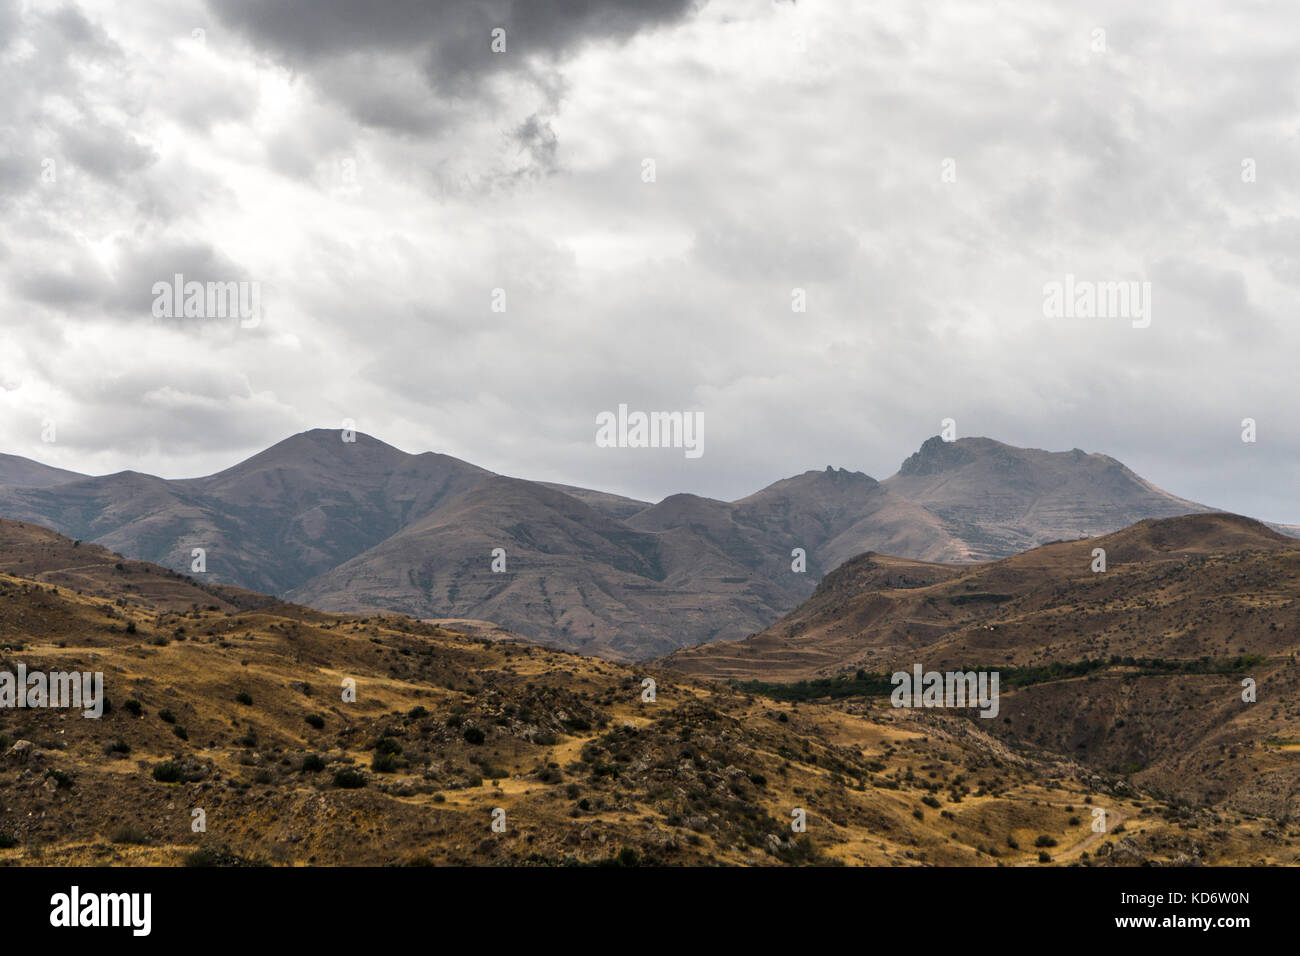 Clouds over the mountains and hills of Armenia horizontal Stock Photo